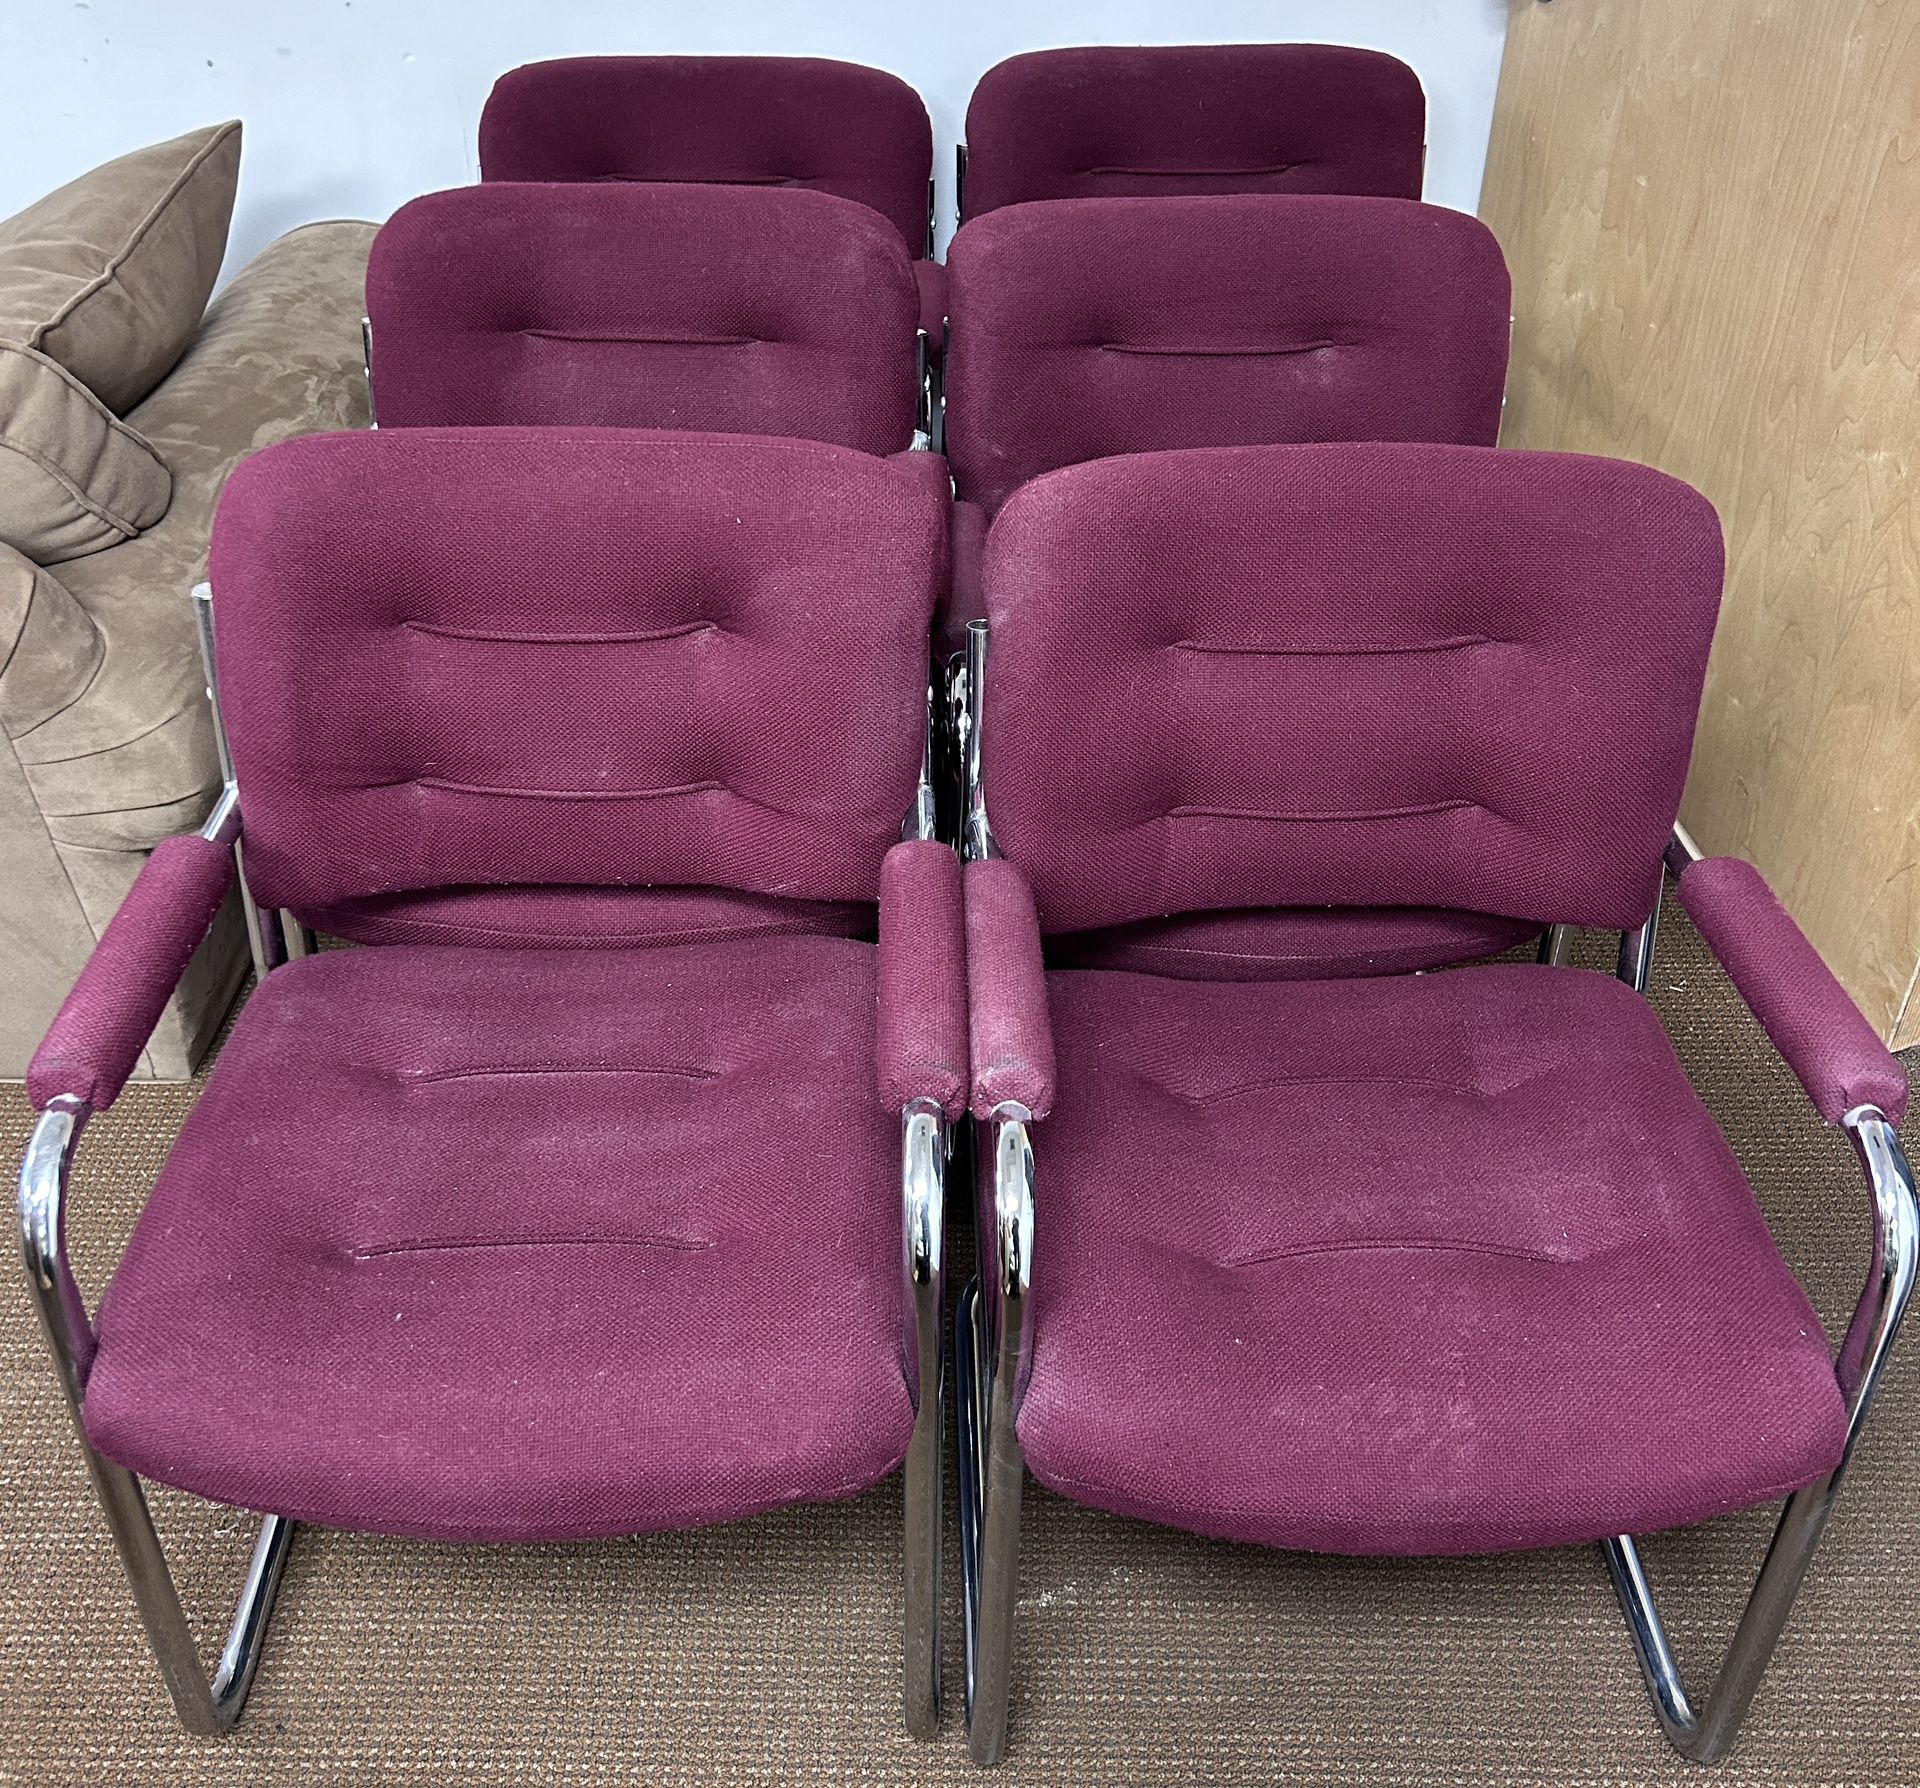 6 Chrome Cantilever Chair. Waiting Room, Conference, Reception, Office Accent Chair. $20ea $100 all 6. Came from office clean out with ceiling getting